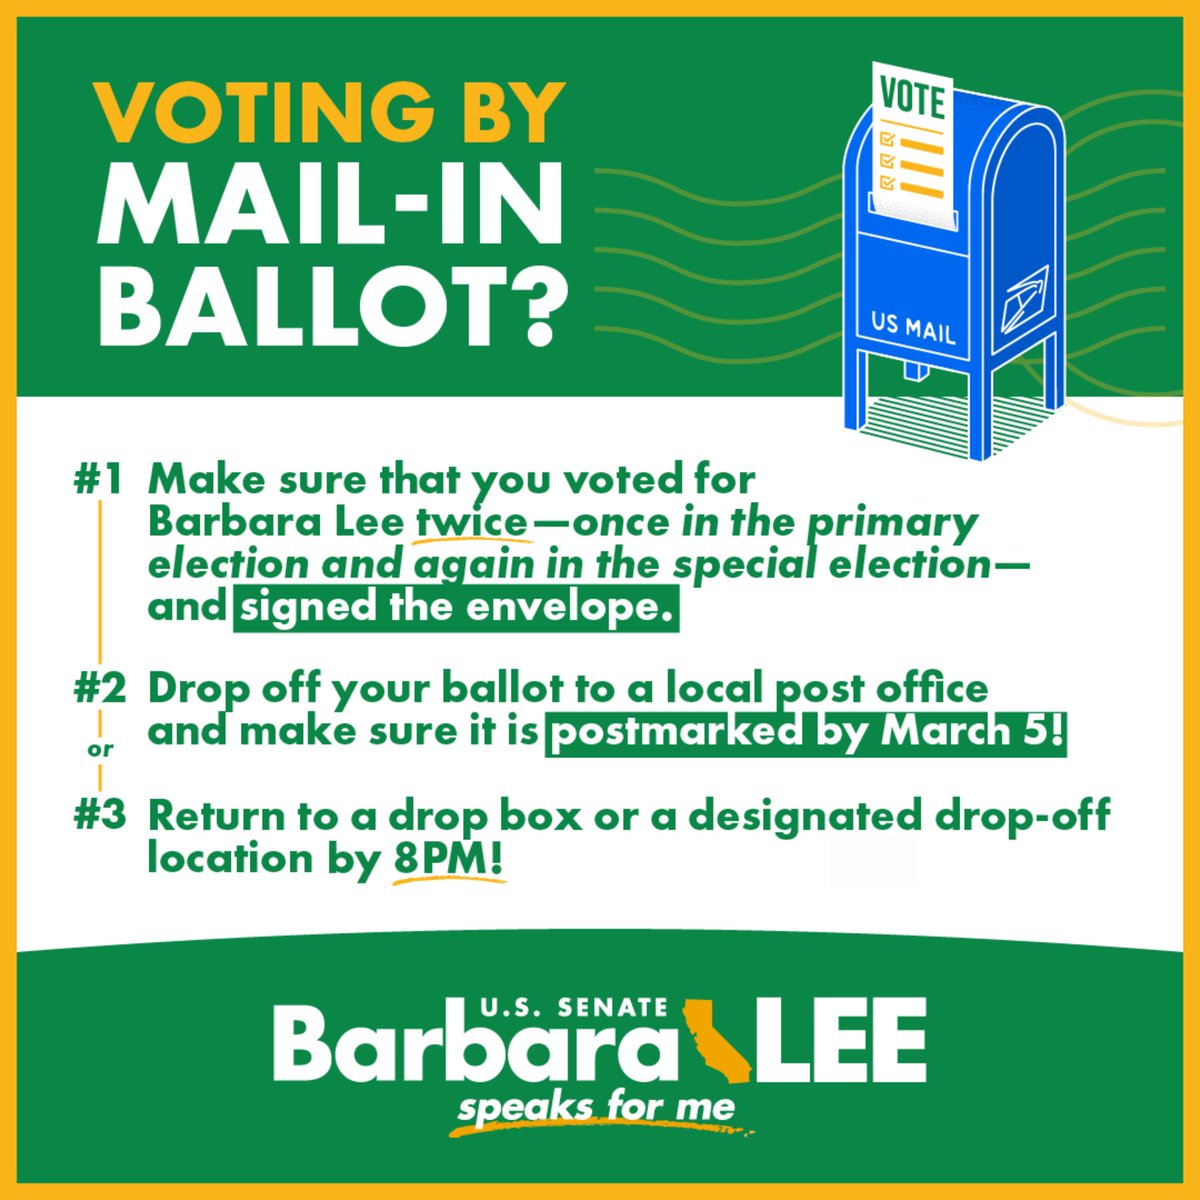 California: if you’re voting for Barbara Lee by mail ballot, make sure to follow these steps and return your ballot by 8 pm TONIGHT! Drop-off locations can be found at sos.ca.gov/elections/poll….